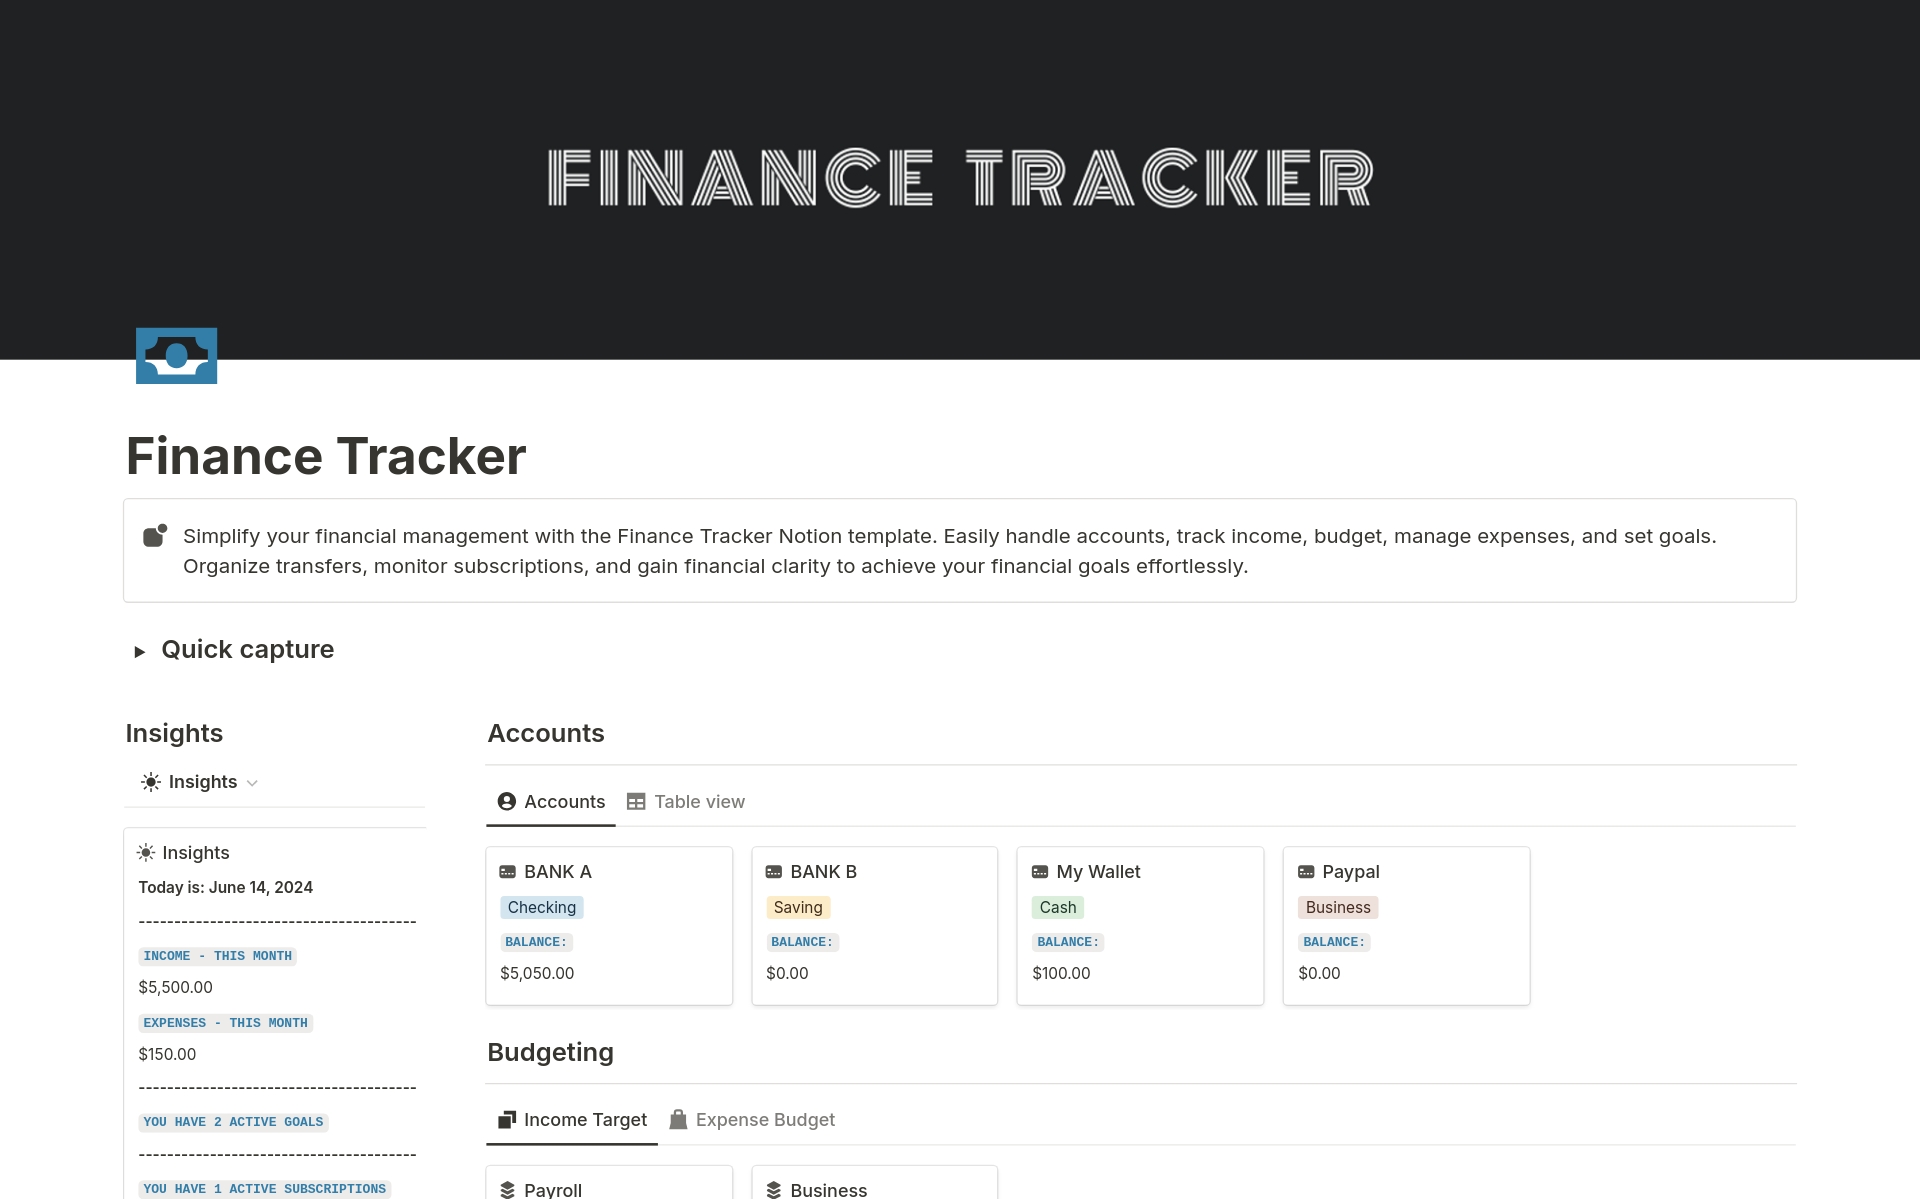 Simplify your financial management with the Finance Tracker Notion template. Easily handle accounts, track income, budget, manage expenses, and set goals. Organize transfers, monitor subscriptions, and gain financial clarity to achieve your financial goals effortlessly.